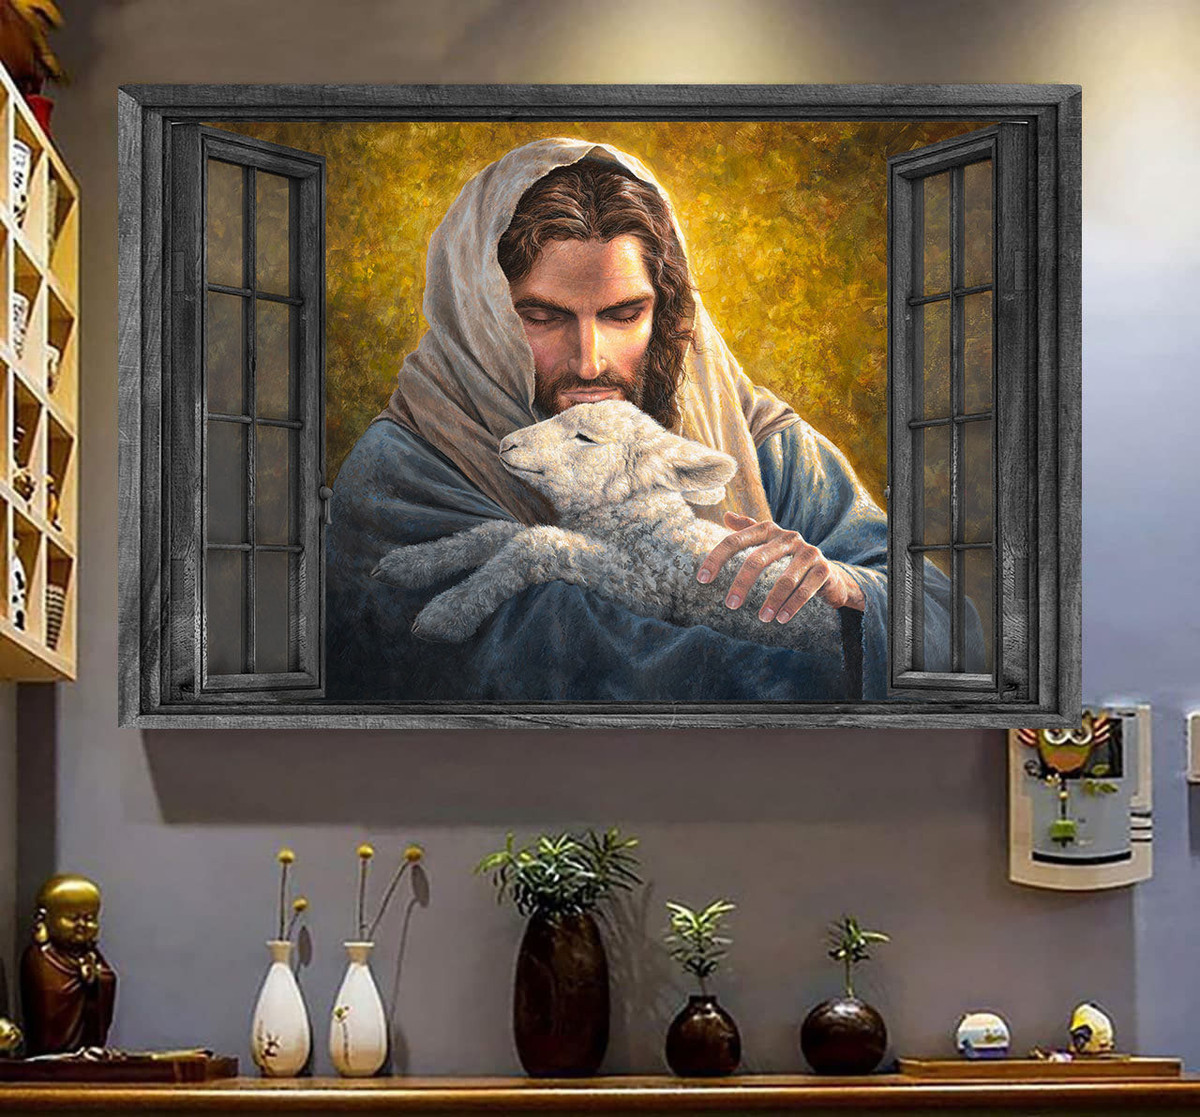 Jesus Sheep 3D Wall Art Painting Art 3D Home Decoration Easter Landscape Seen Through Window Scene Wall Mural, 3D Window Wall Decal, Window Wall Mural, Window Wall Sticker, Window Sticker Gift Idea 18x30IN